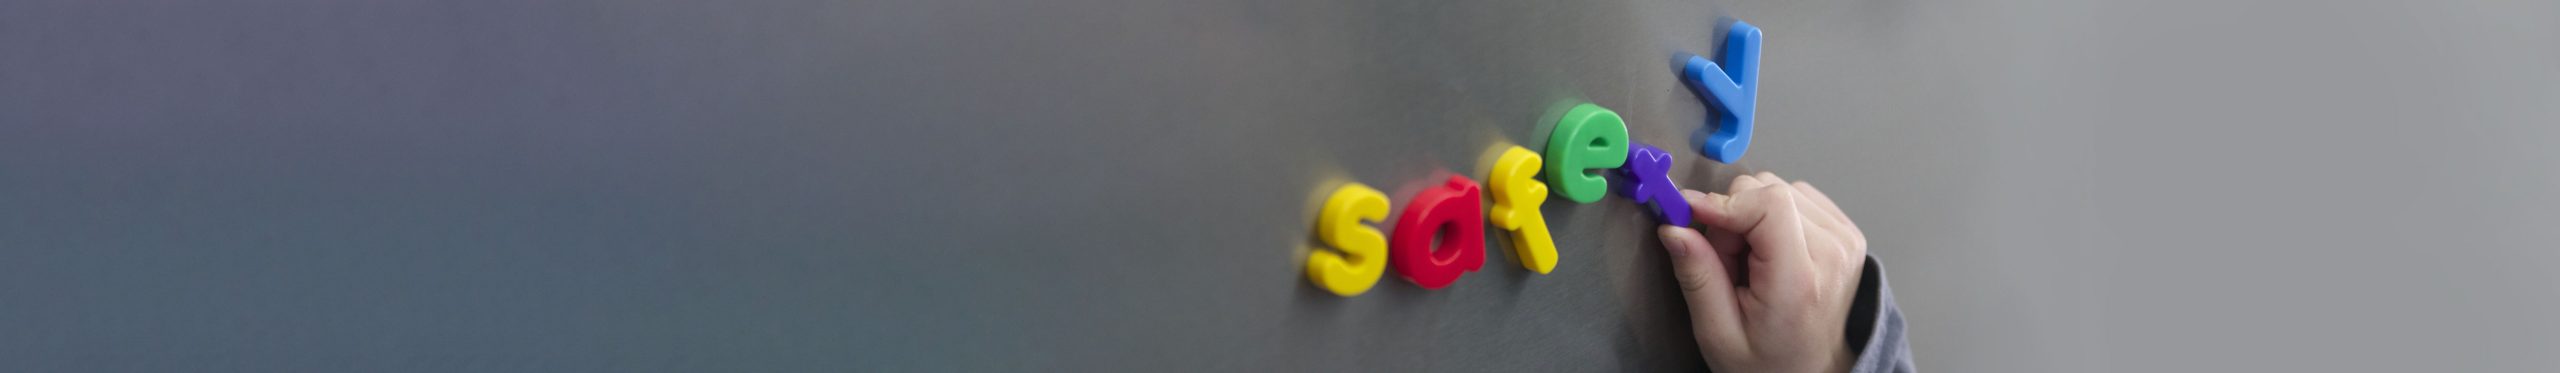 close up of letter magnets spelling "safety" on a silver surface